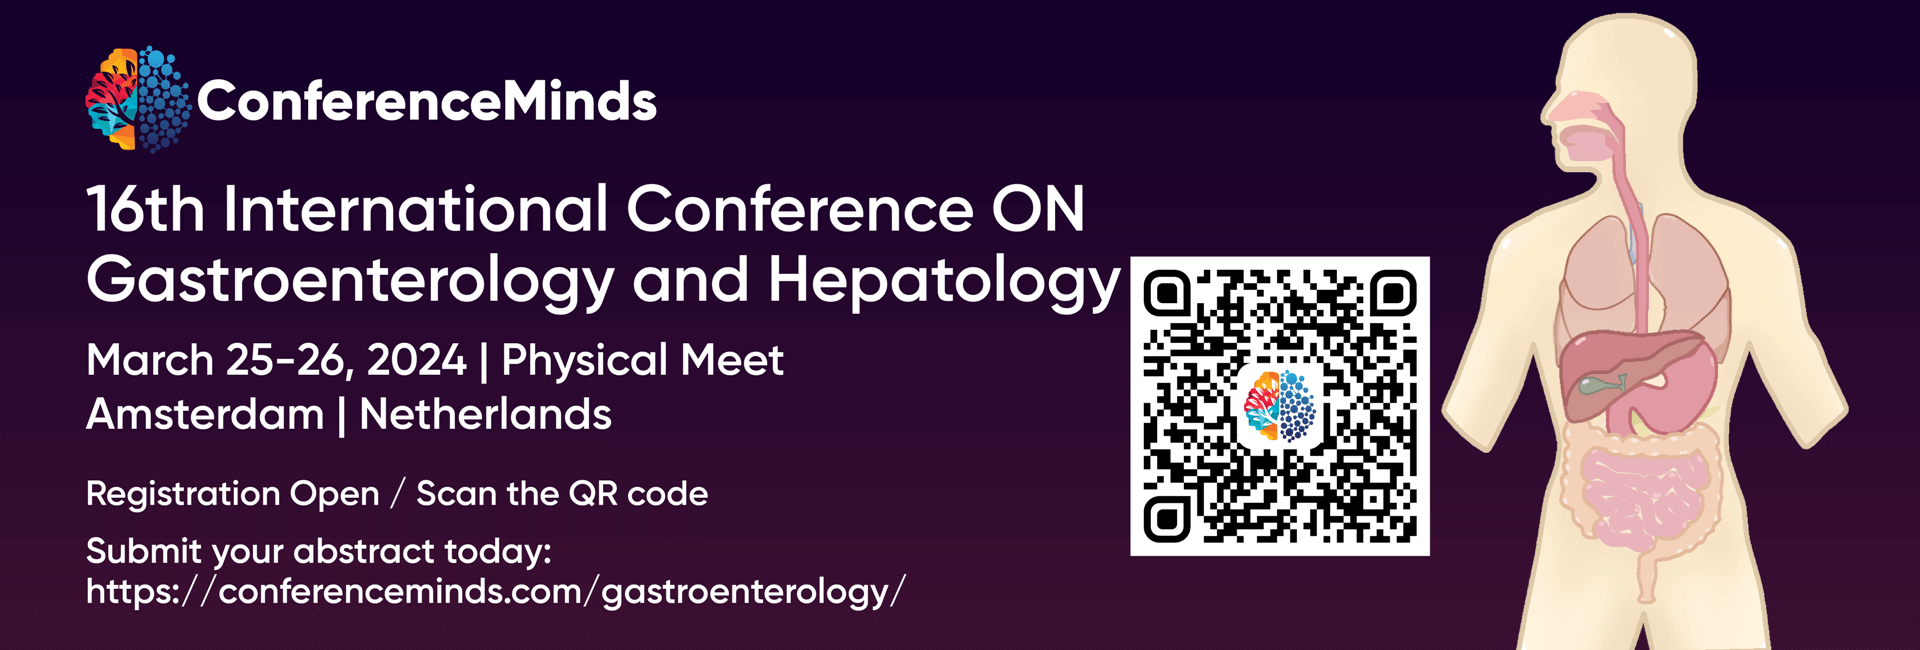 Gastroenterology Conference 2024 Gastro Conference 2024 Hepatology